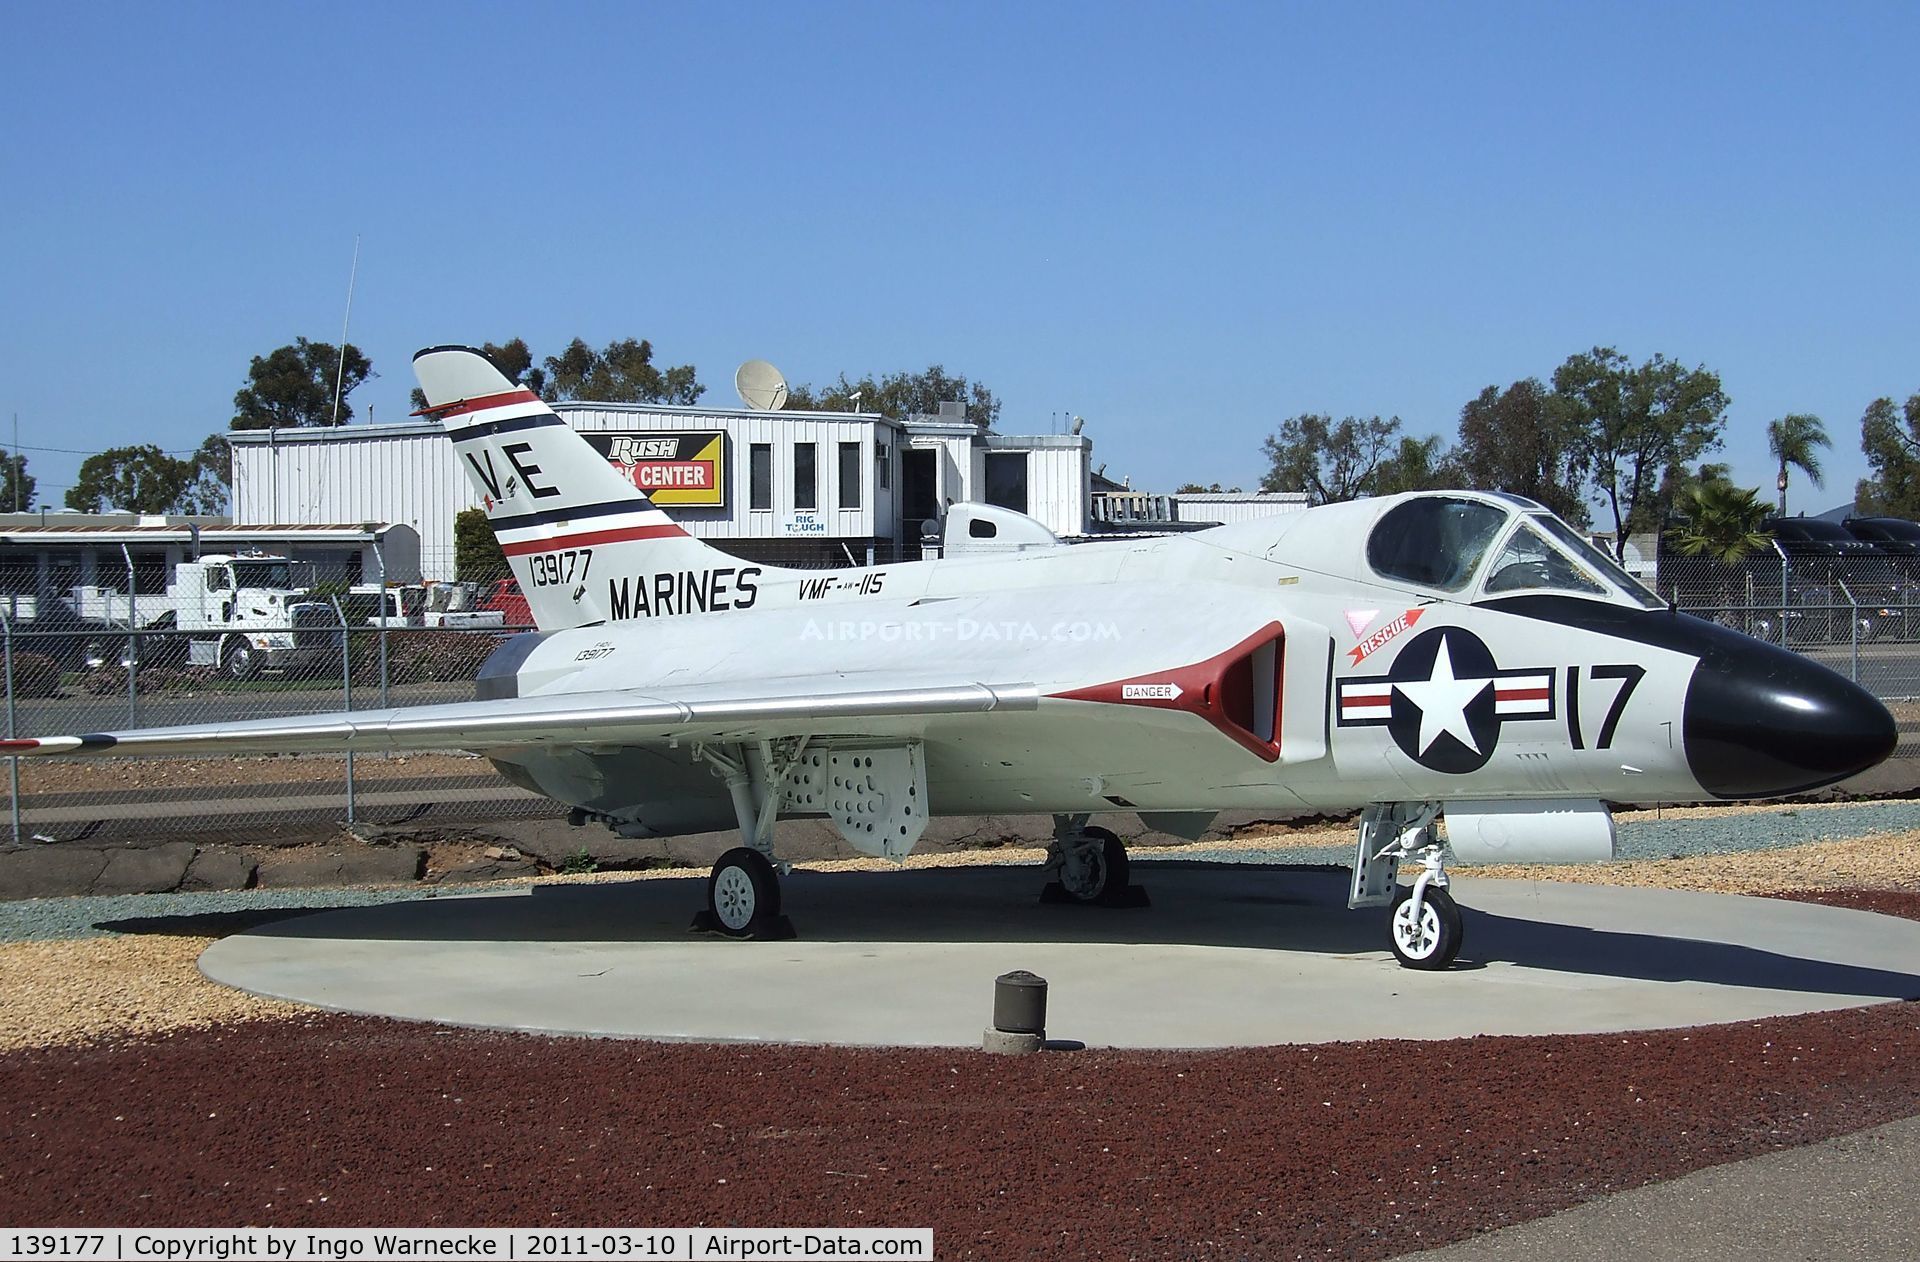 139177, Douglas F-6A Skyray C/N 11251, Douglas F4D-1 / F-6A Skyray at the Flying Leatherneck Aviation Museum, Miramar CA